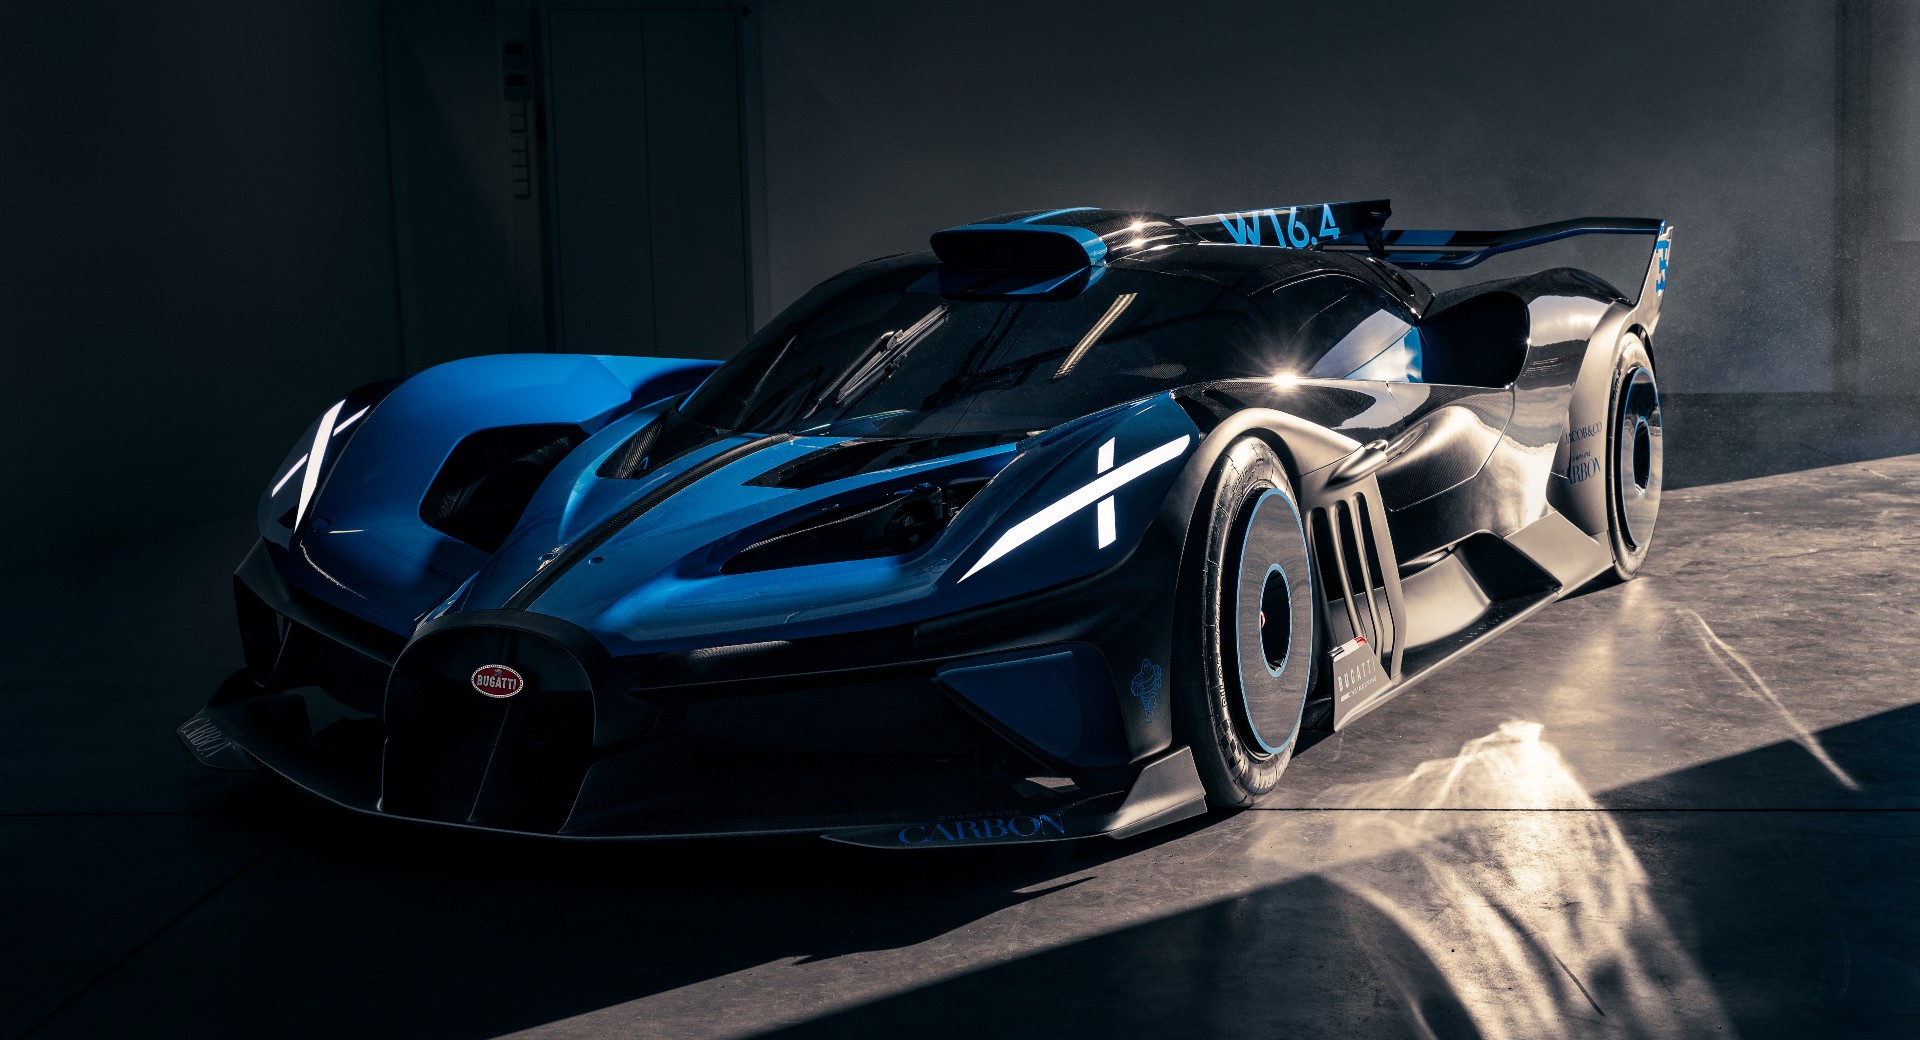 1578-HP Bugatti Bolide Track-Only Hypercar Going into Production